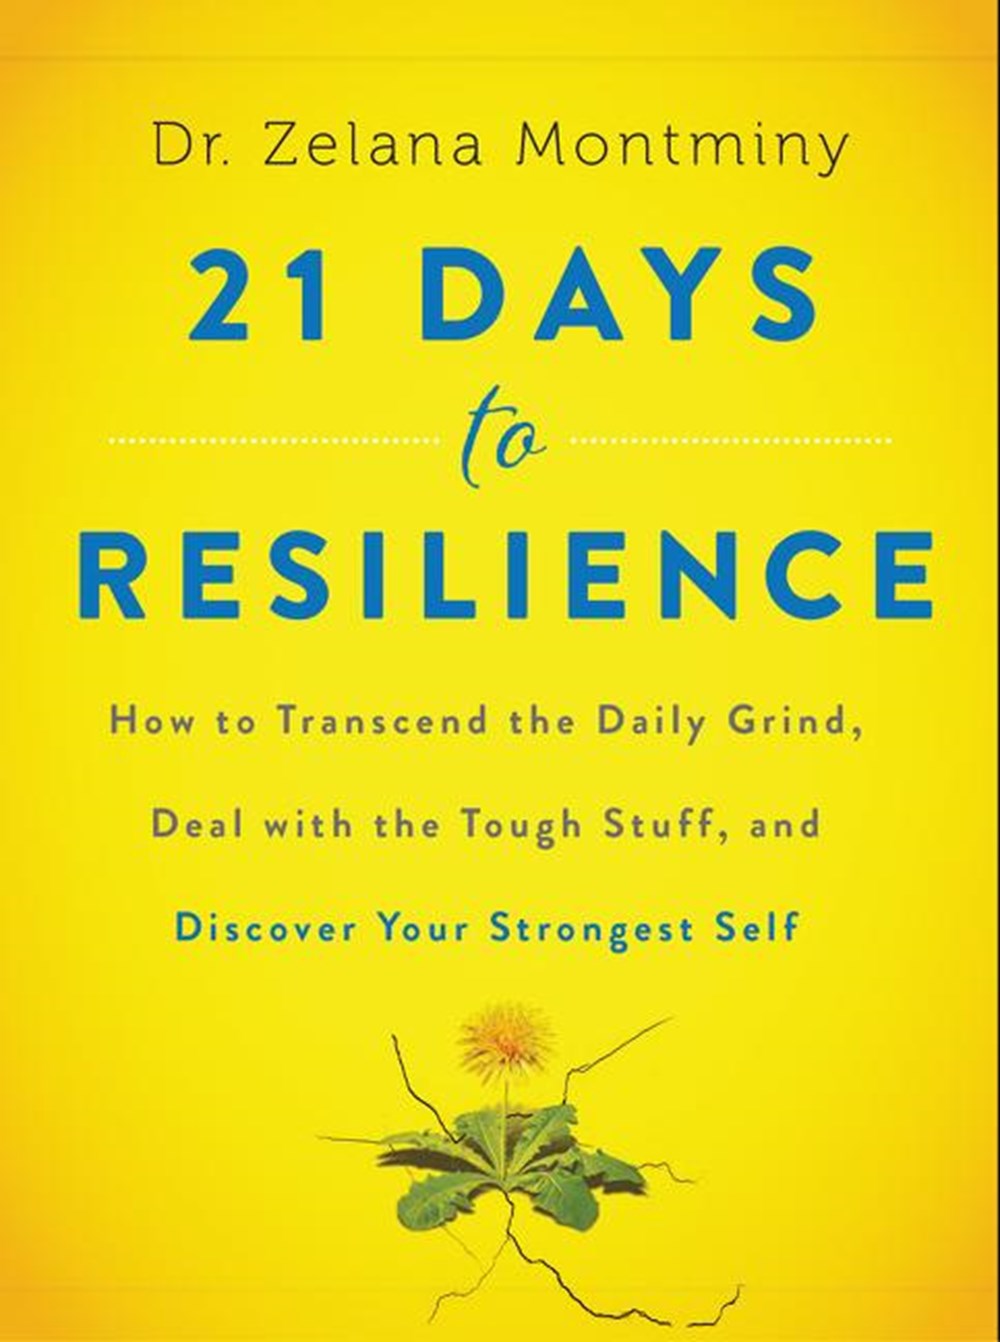 21 Days to Resilience: How to Transcend the Daily Grind, Deal with the Tough Stuff, and Discover You